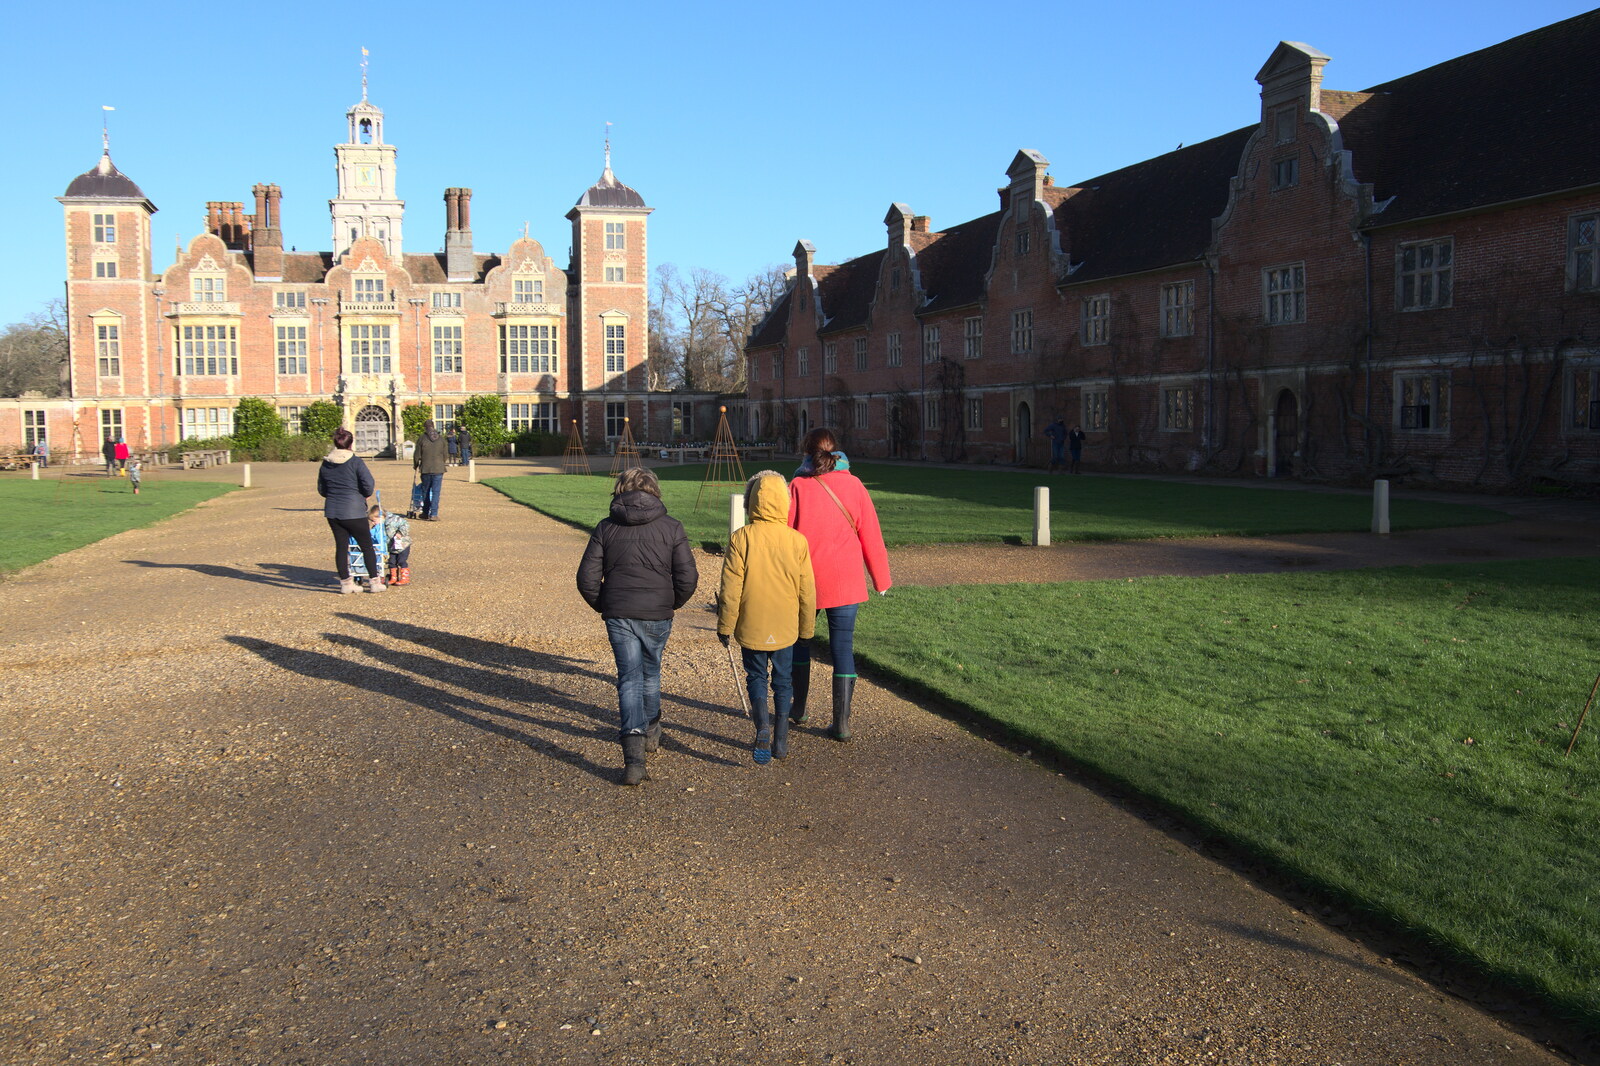 The gravel path to Blickling Hall from A Visit to Blickling Hall, Aylsham, Norfolk - 9th January 2022